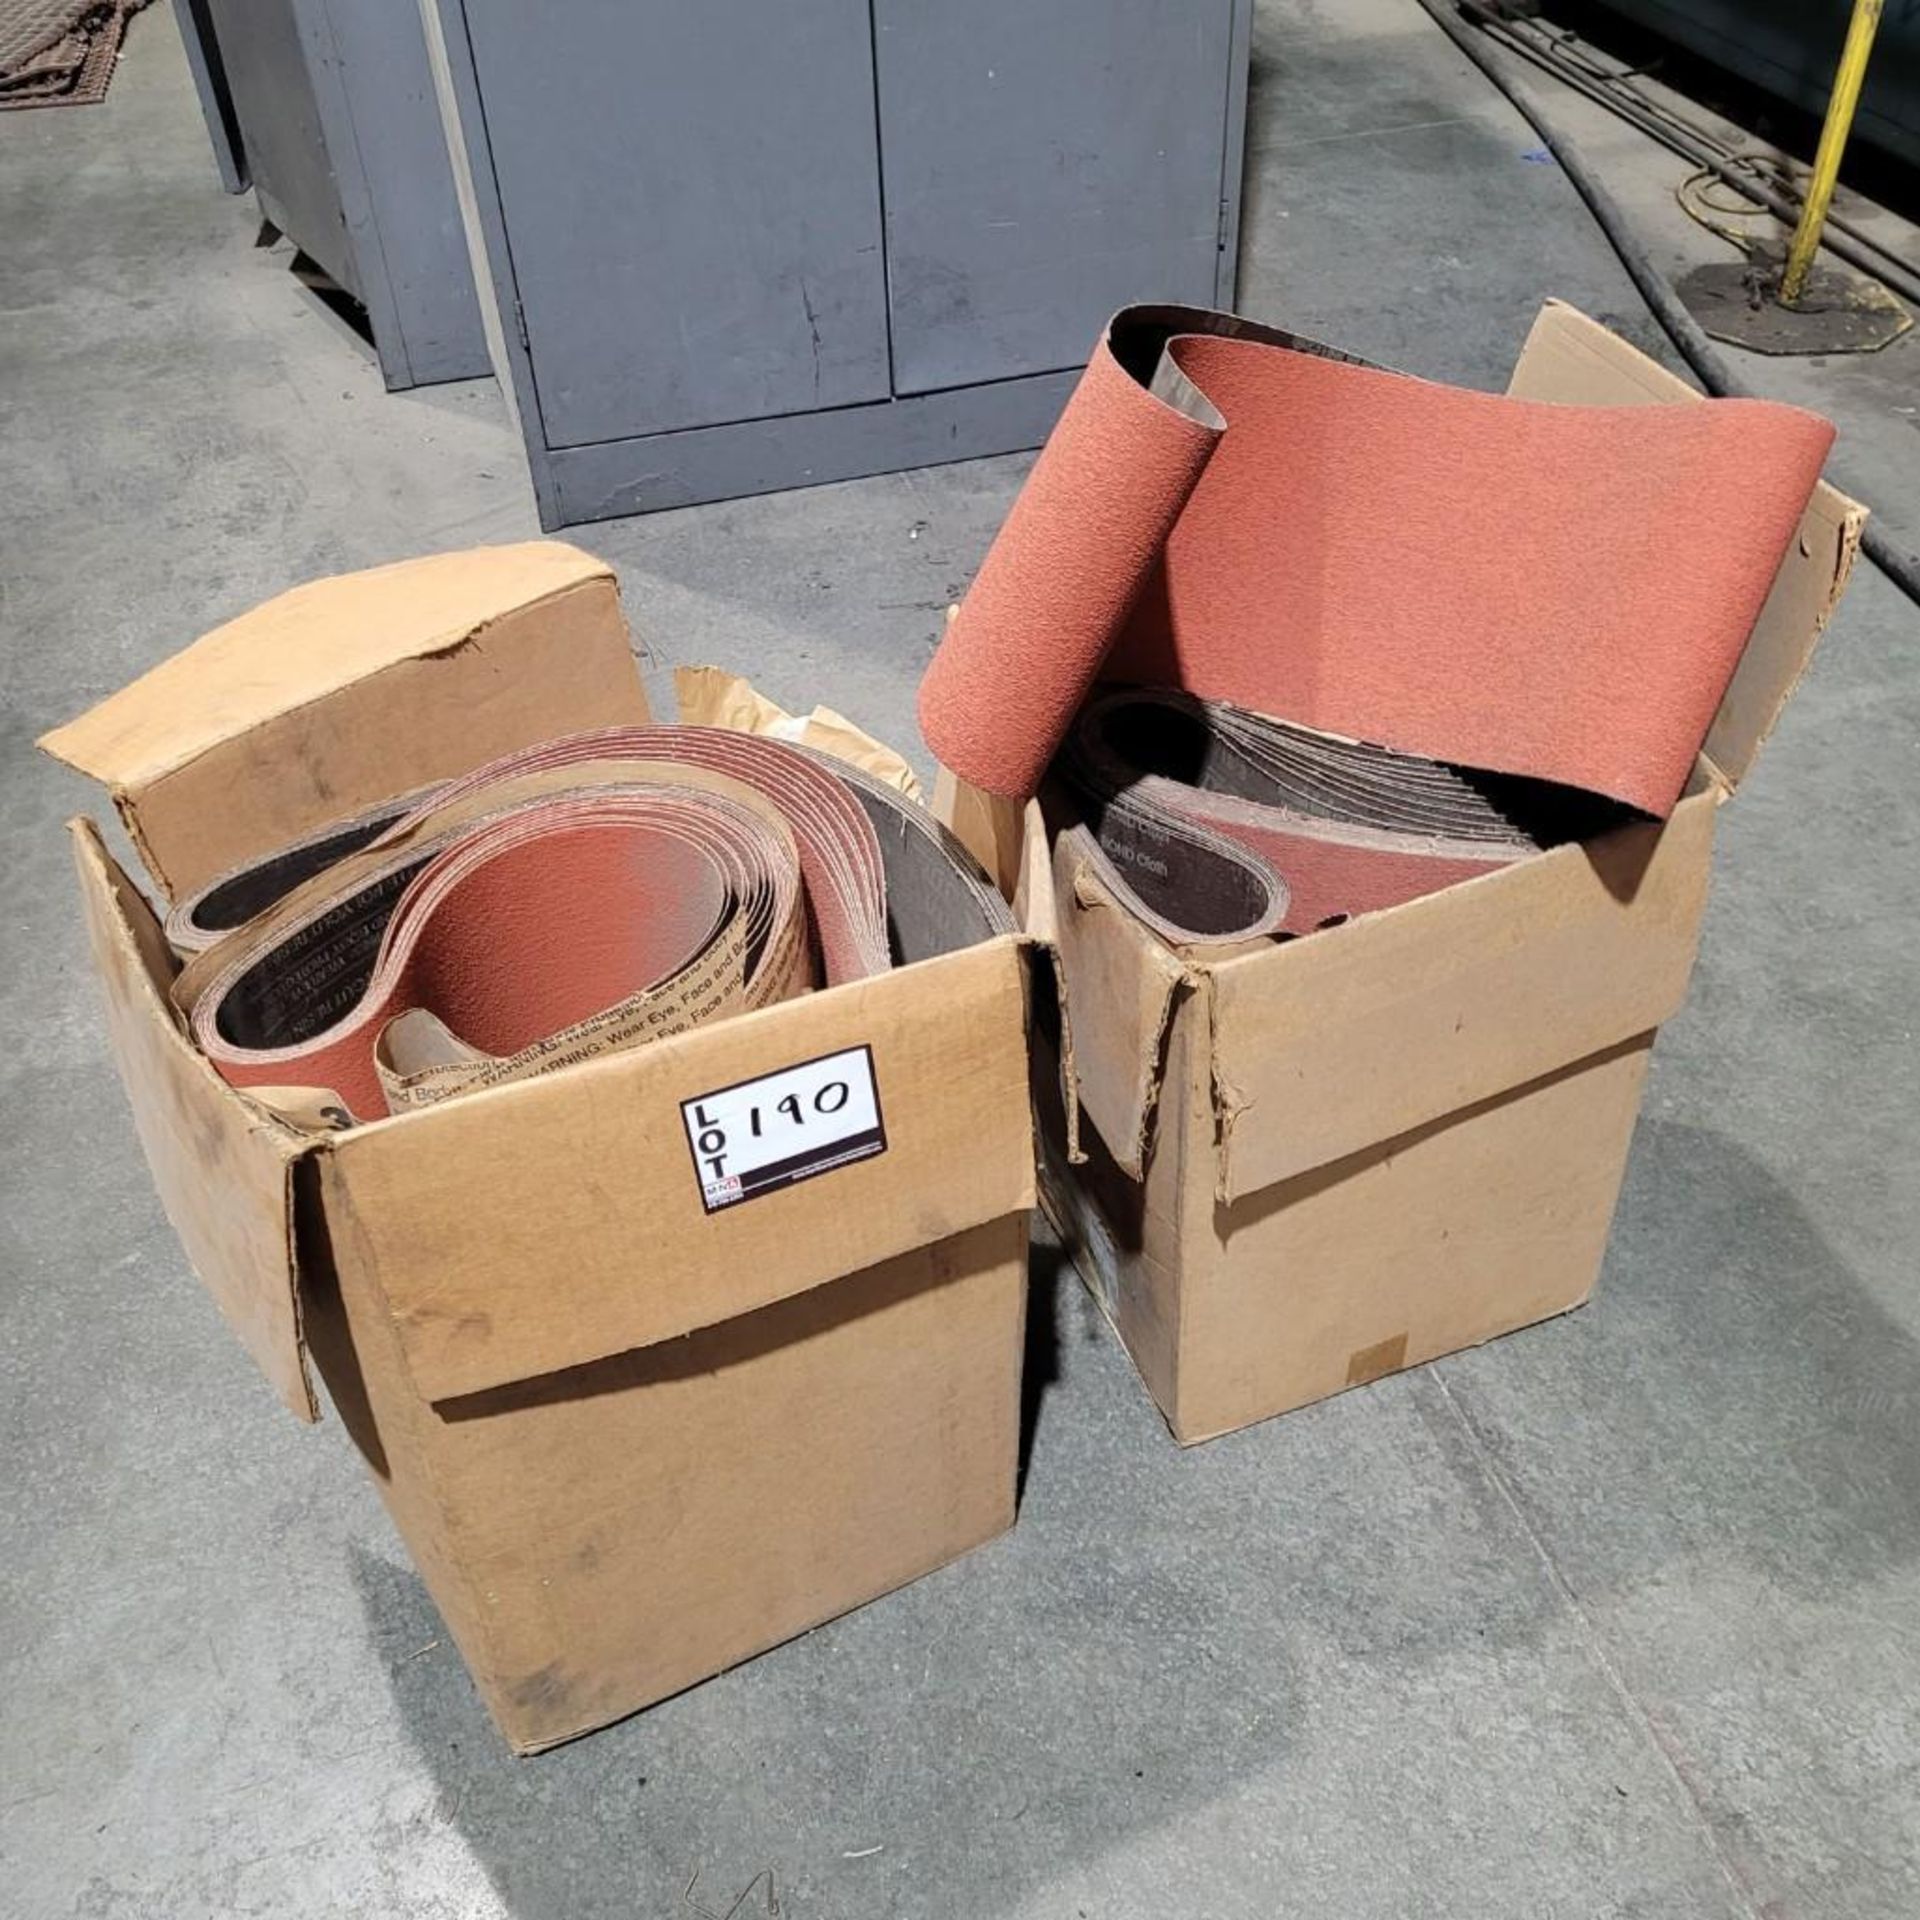 9" x 60" Belts for Timesaver *Approximately 70 New Belts*